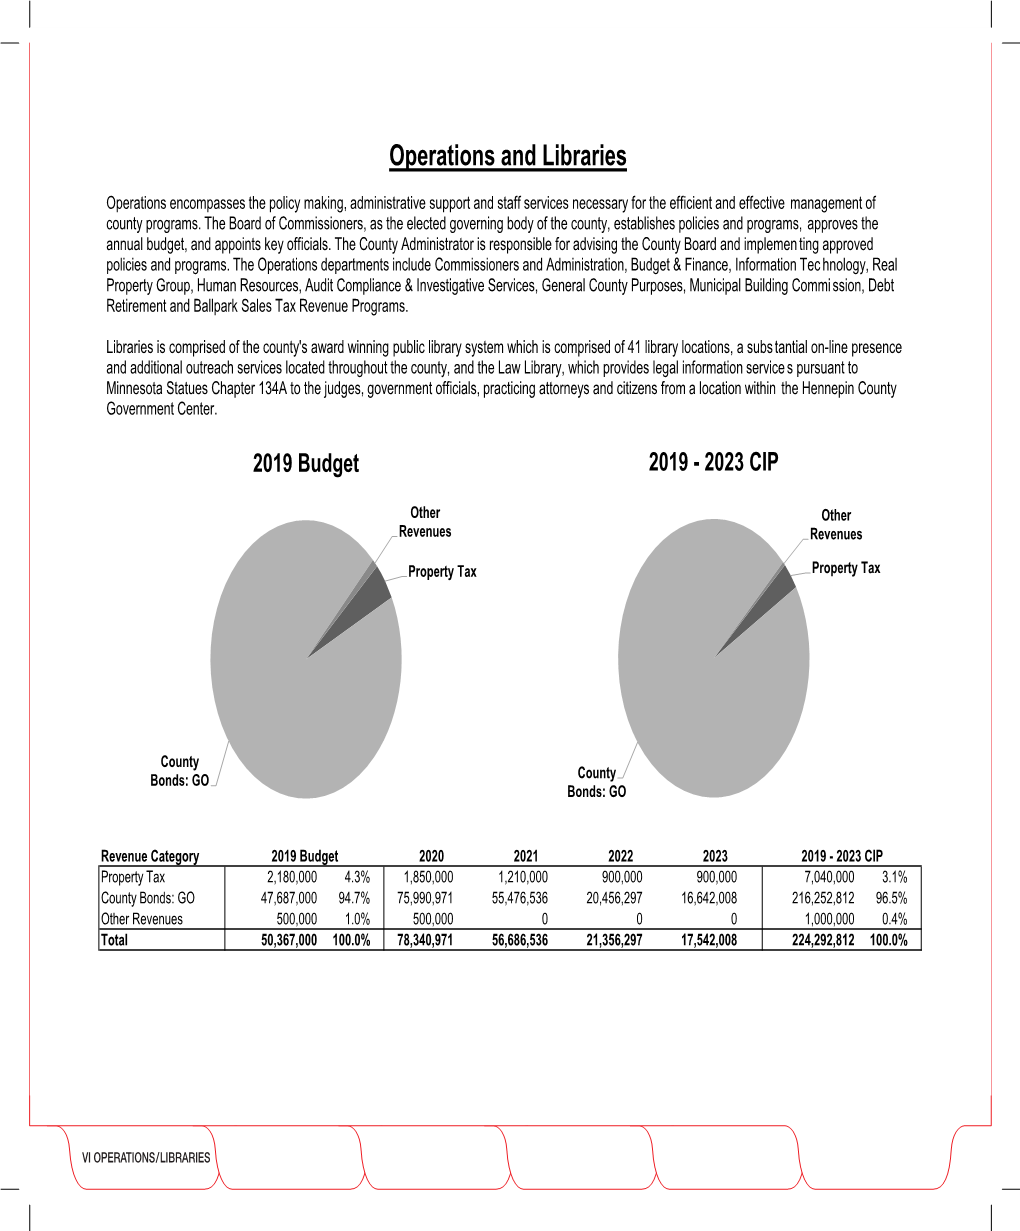 Capital Budget – Operations and Libraries (PDF)